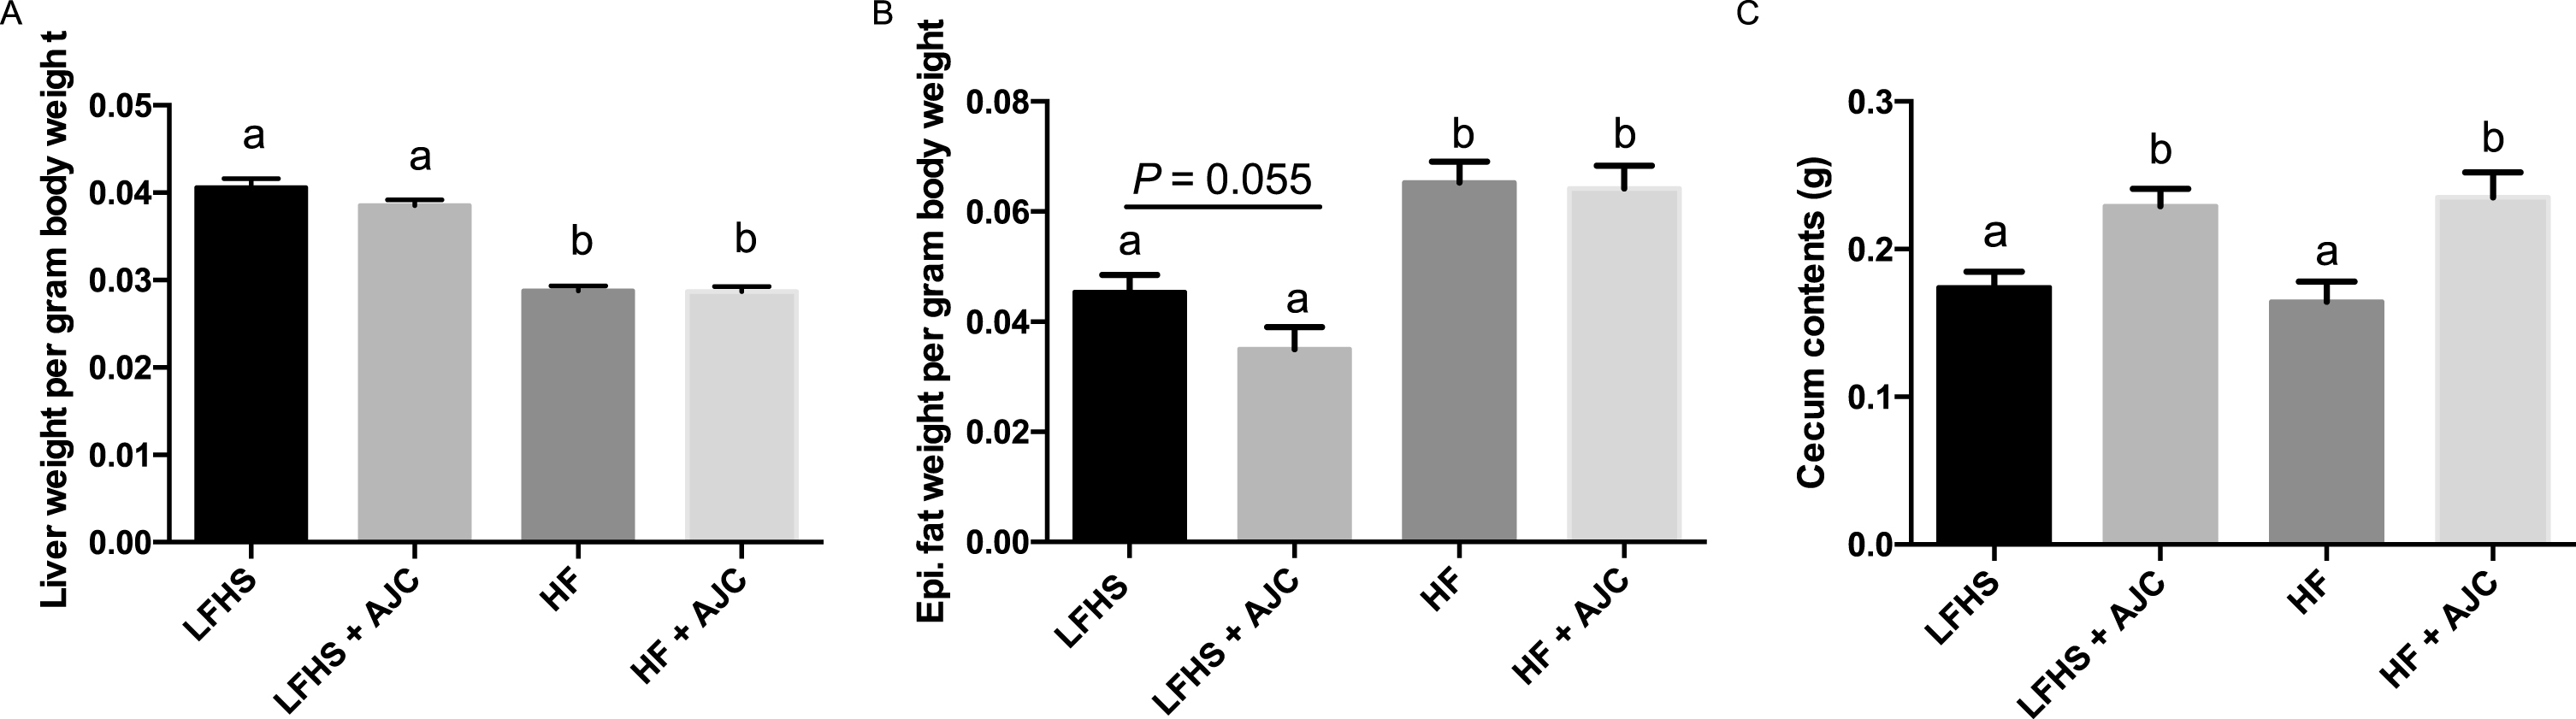 The effect of Aronia juice supplementation on liver weight, epididymal fat, and cecum contents. A. Liver weight per gram body weight. B. Epididymal fat pad weight per gram body weight. C. Weight of cecum contents. Data expressed as means + SEM. Means not sharing the same letter are significantly different (one-way ANOVA; P < 0.05). LFHS: Low-fat, high-sucrose; AJC: Aronia juice concentrate; HF: High-fat.